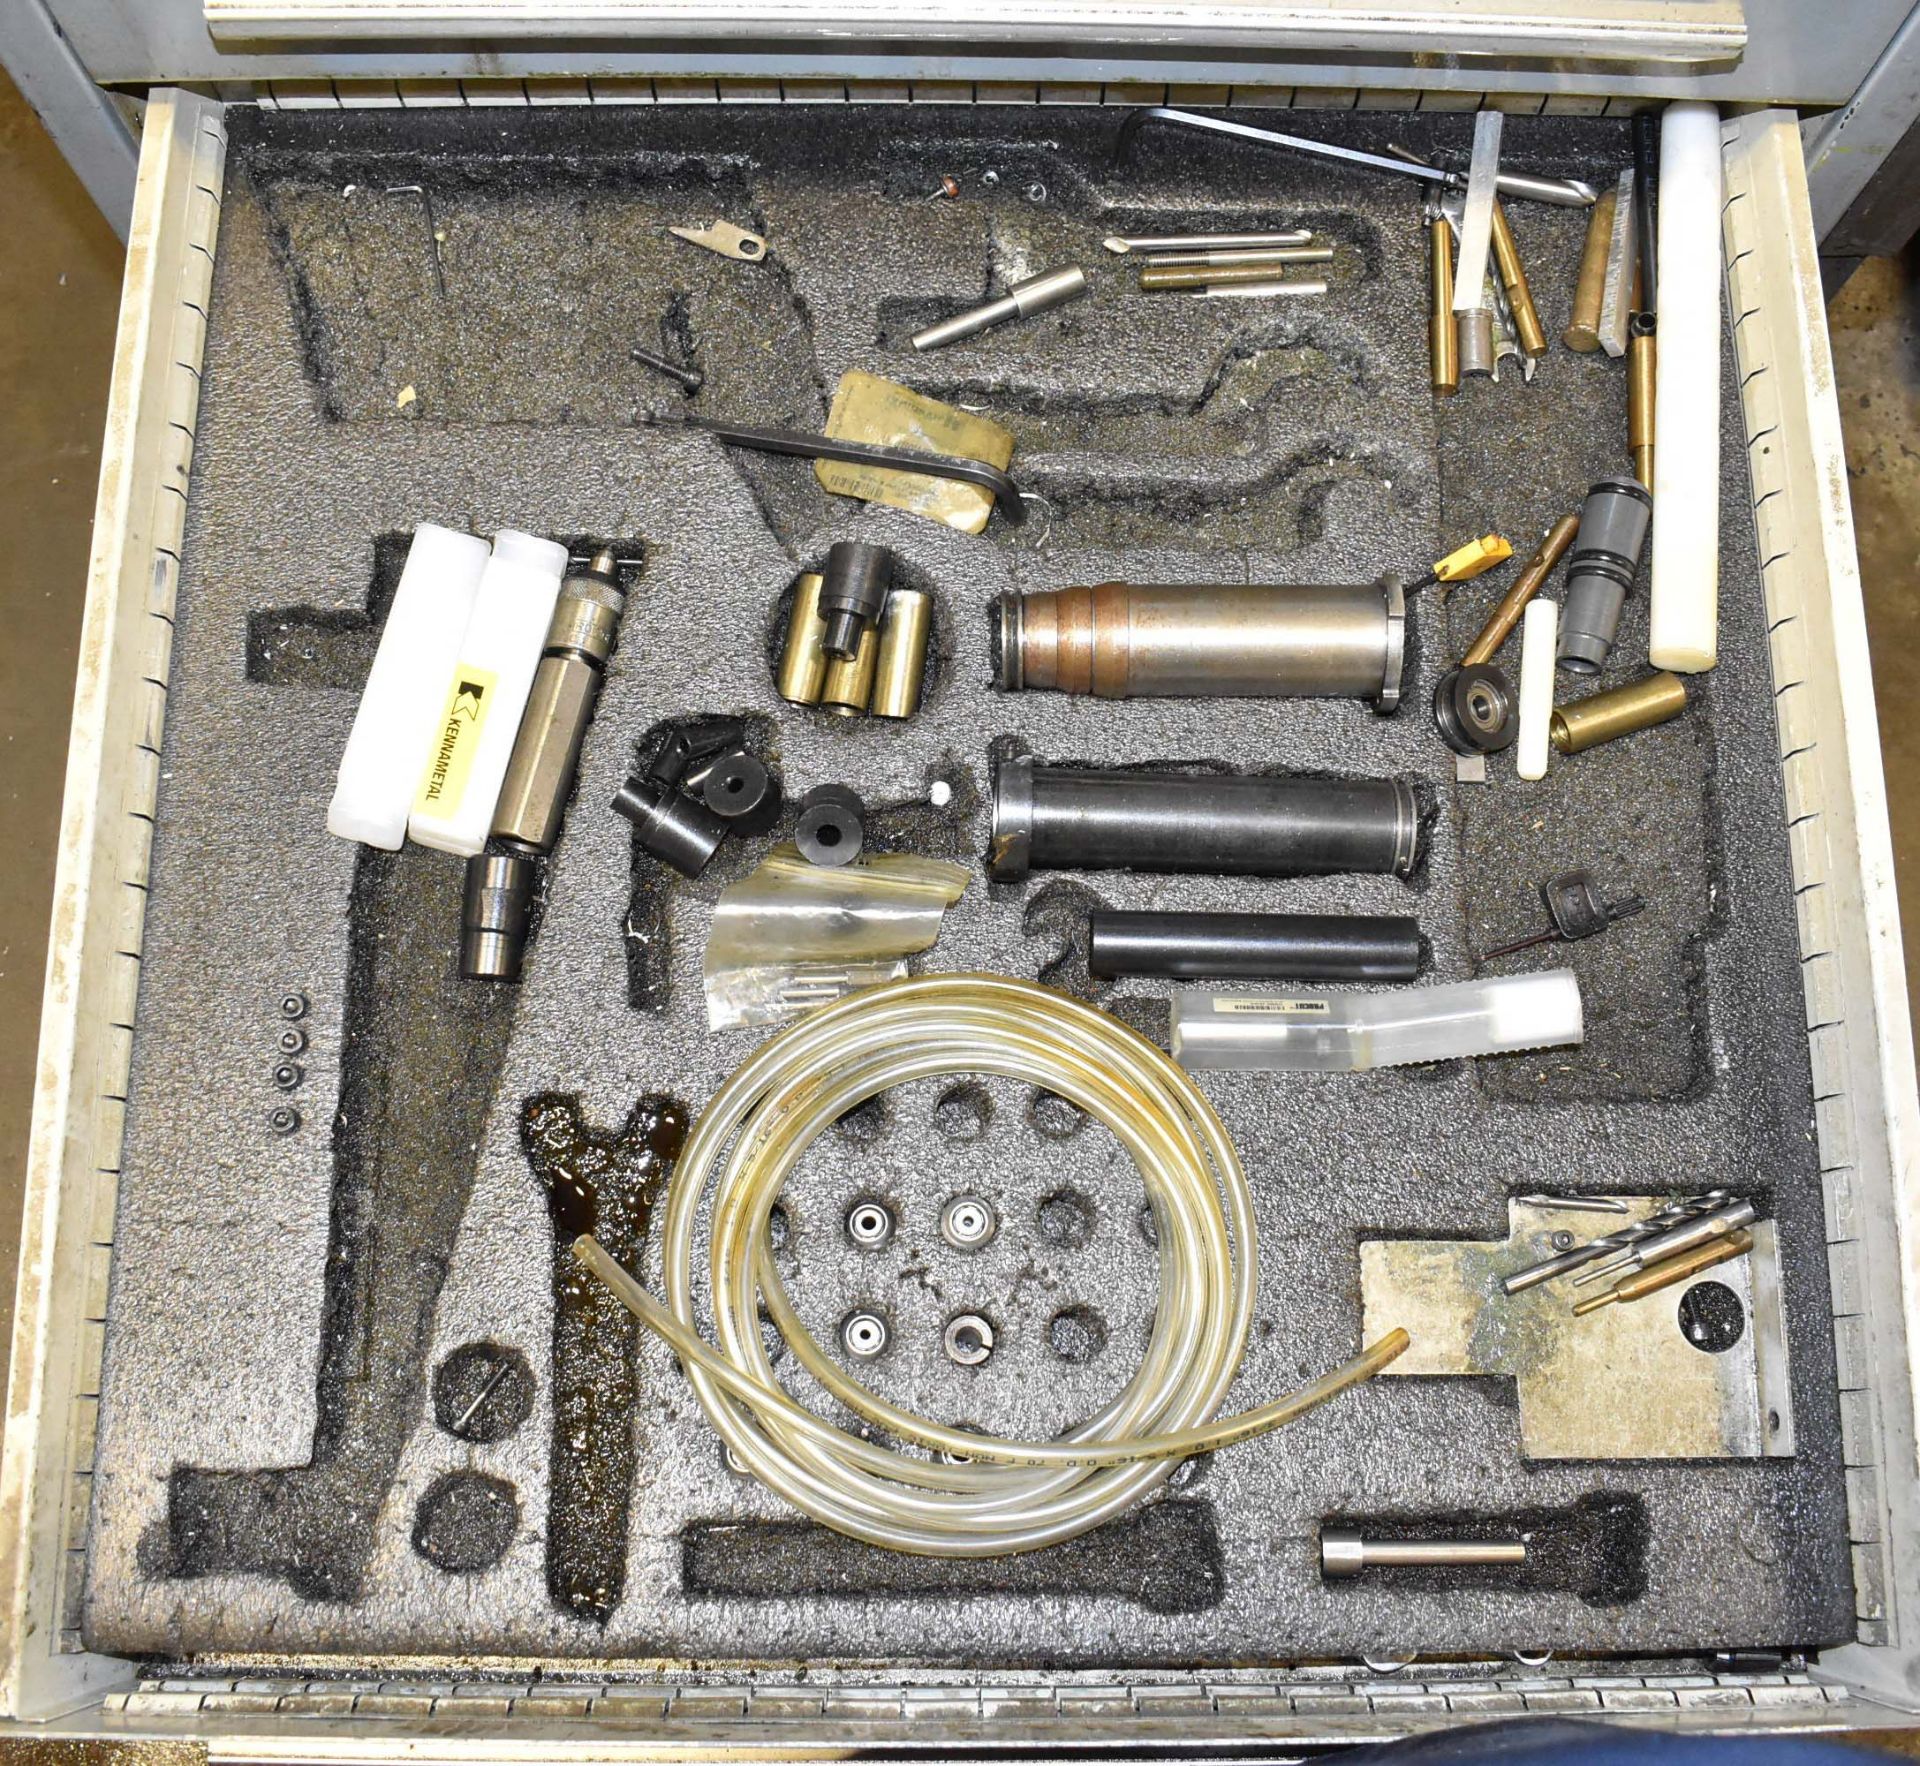 LOT/ CONTENTS OF CABINET CONSISTING OF TURNING CENTER ACCESSORIES - Image 5 of 7